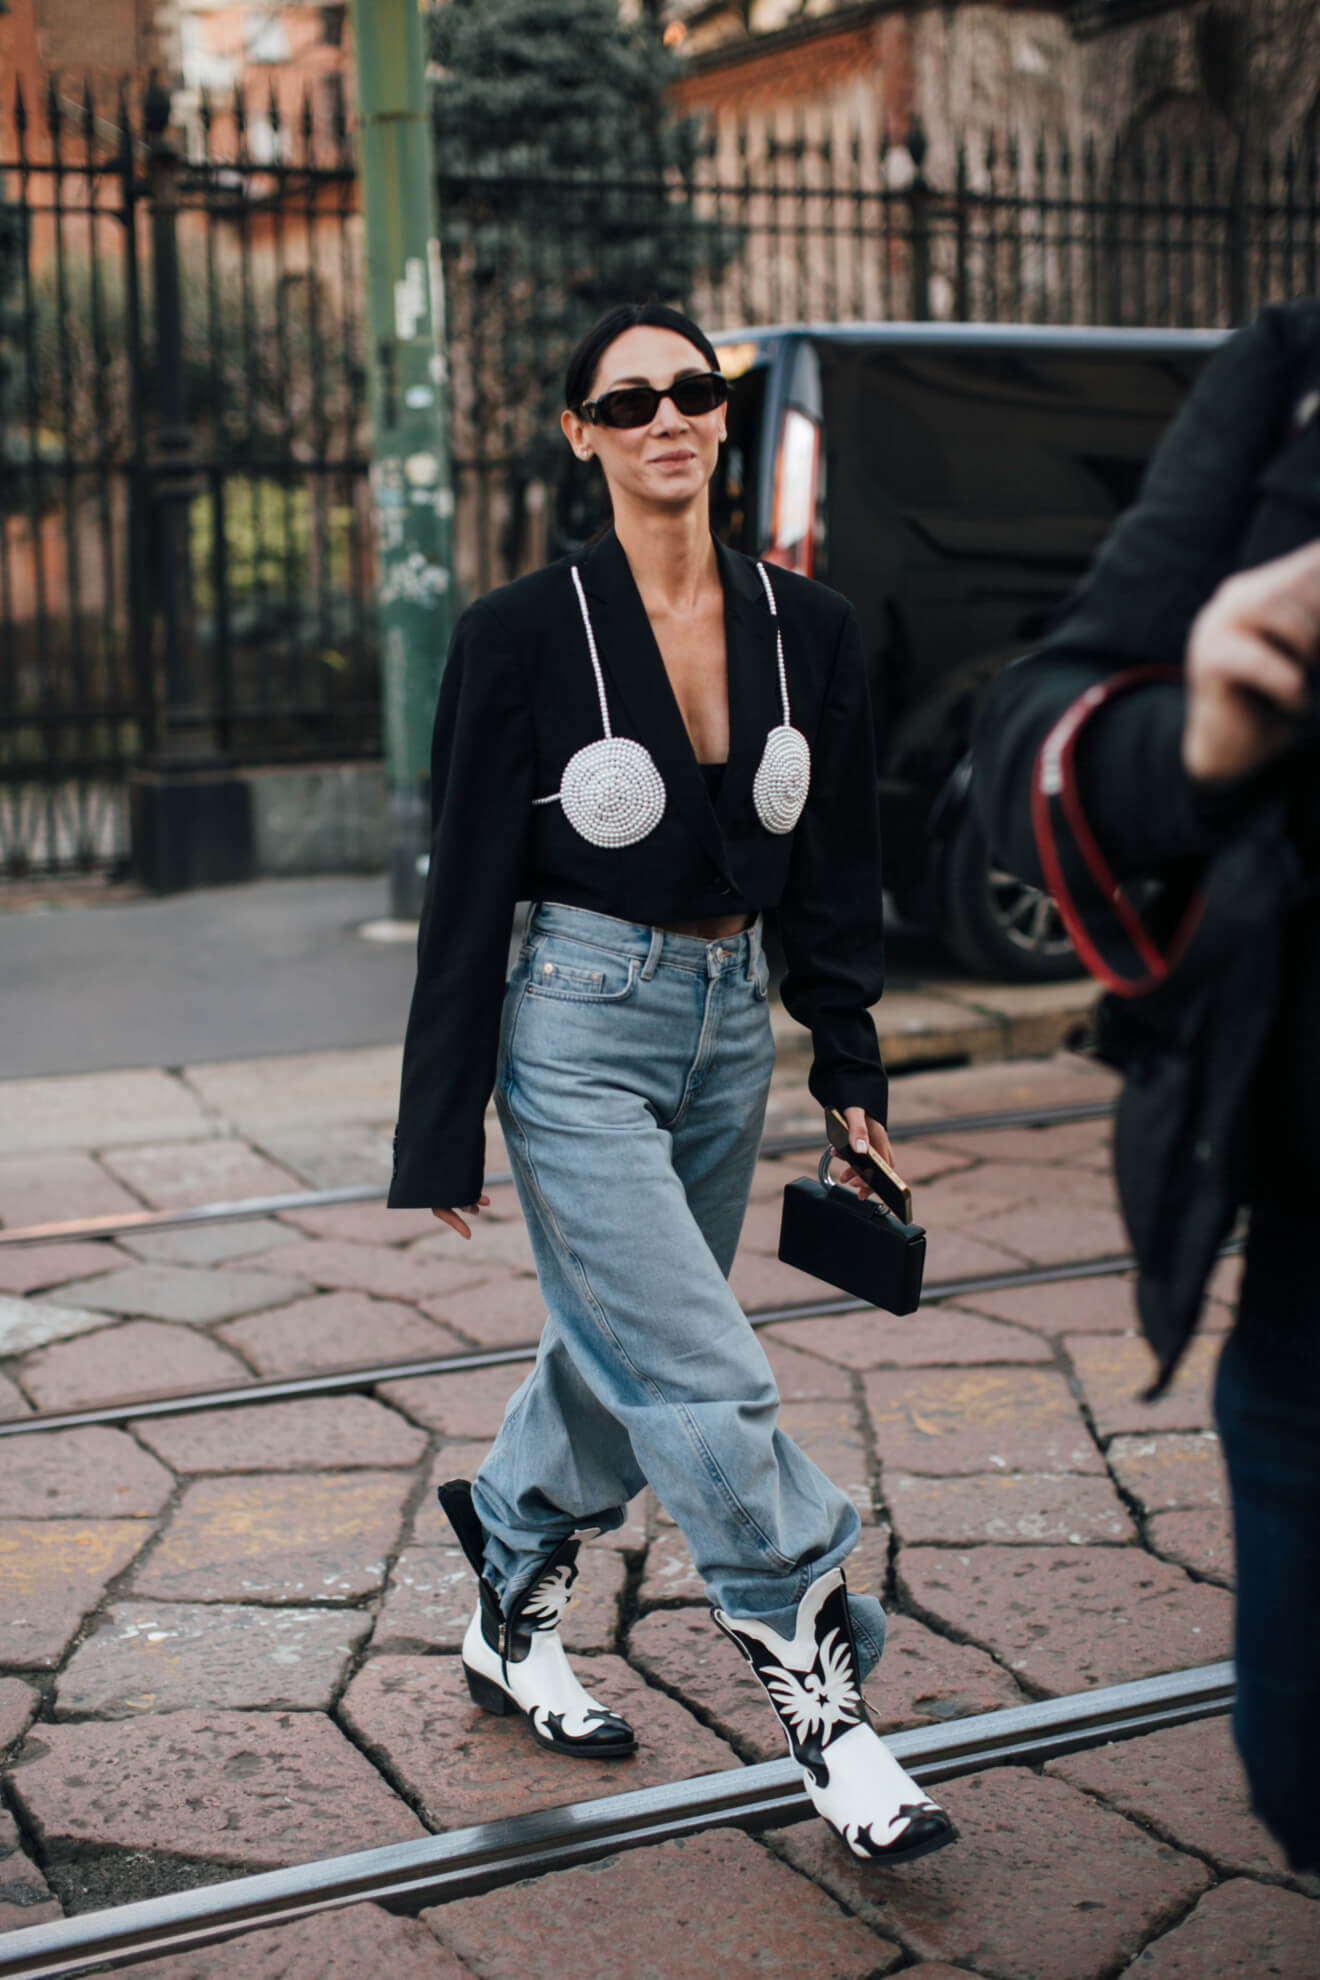 Woman at fashion week wears cowboy boots tucked into denim jeans